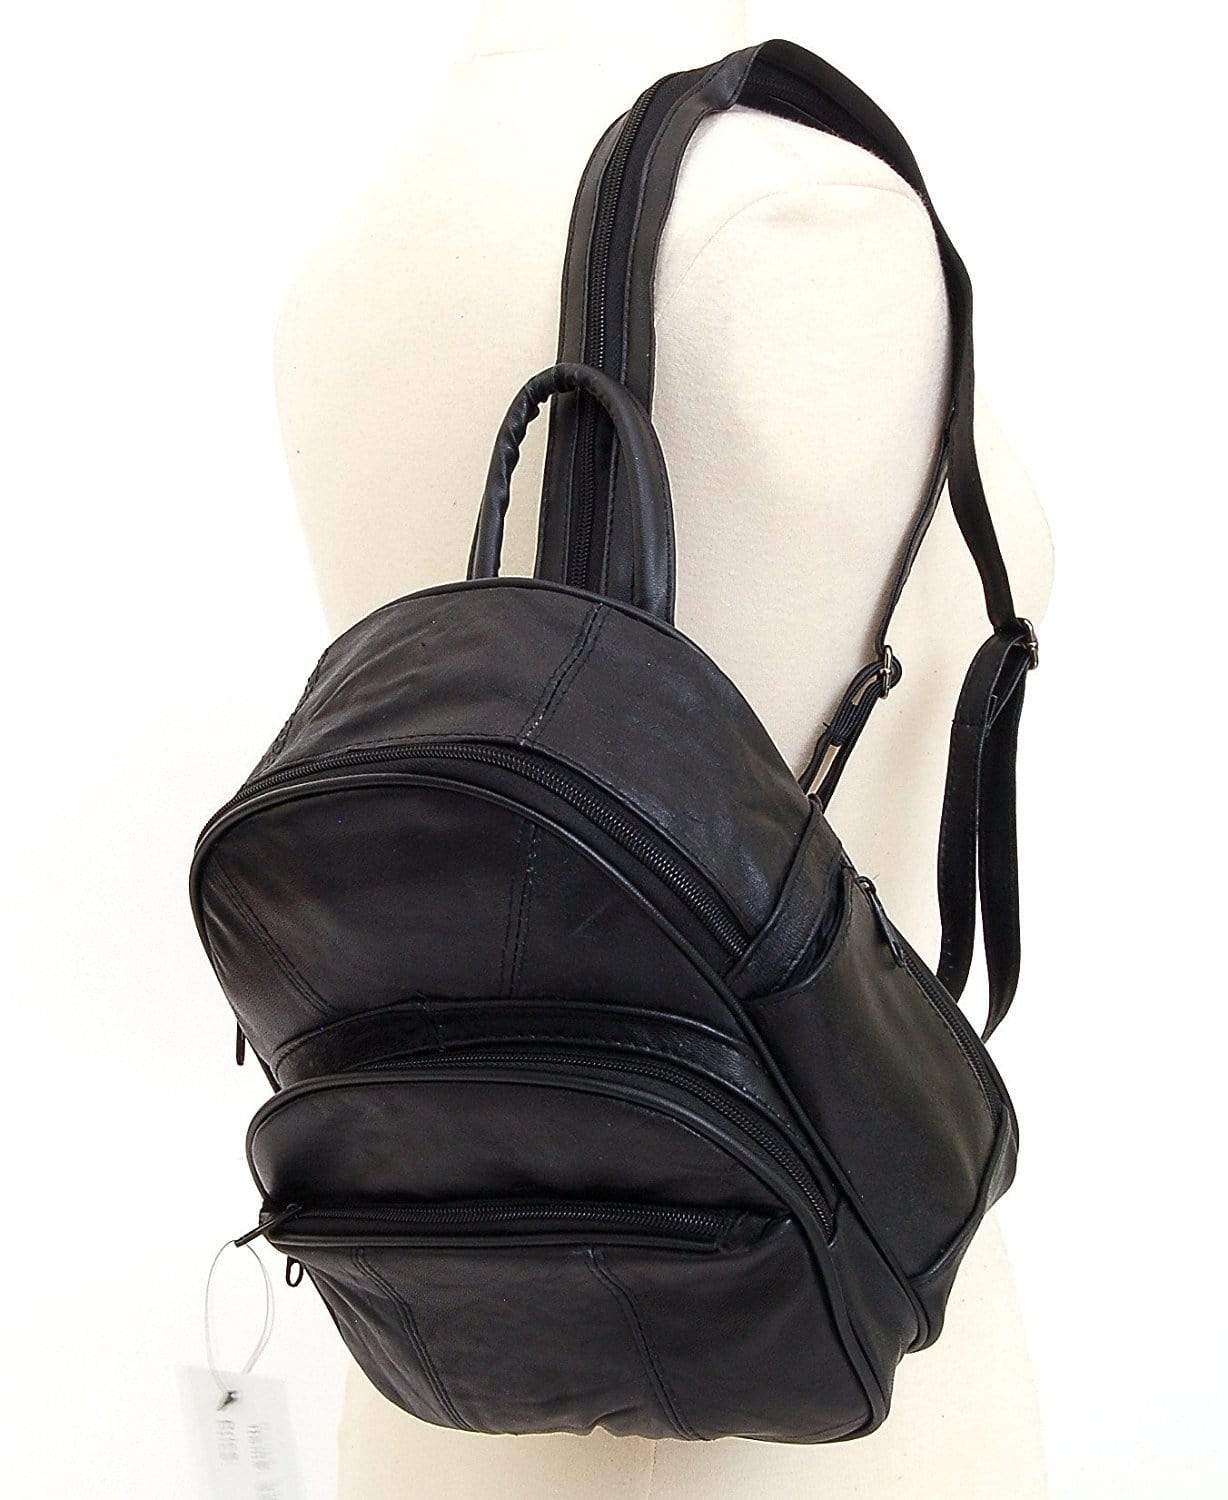 Convertible Leather Backpack In Dark Grey